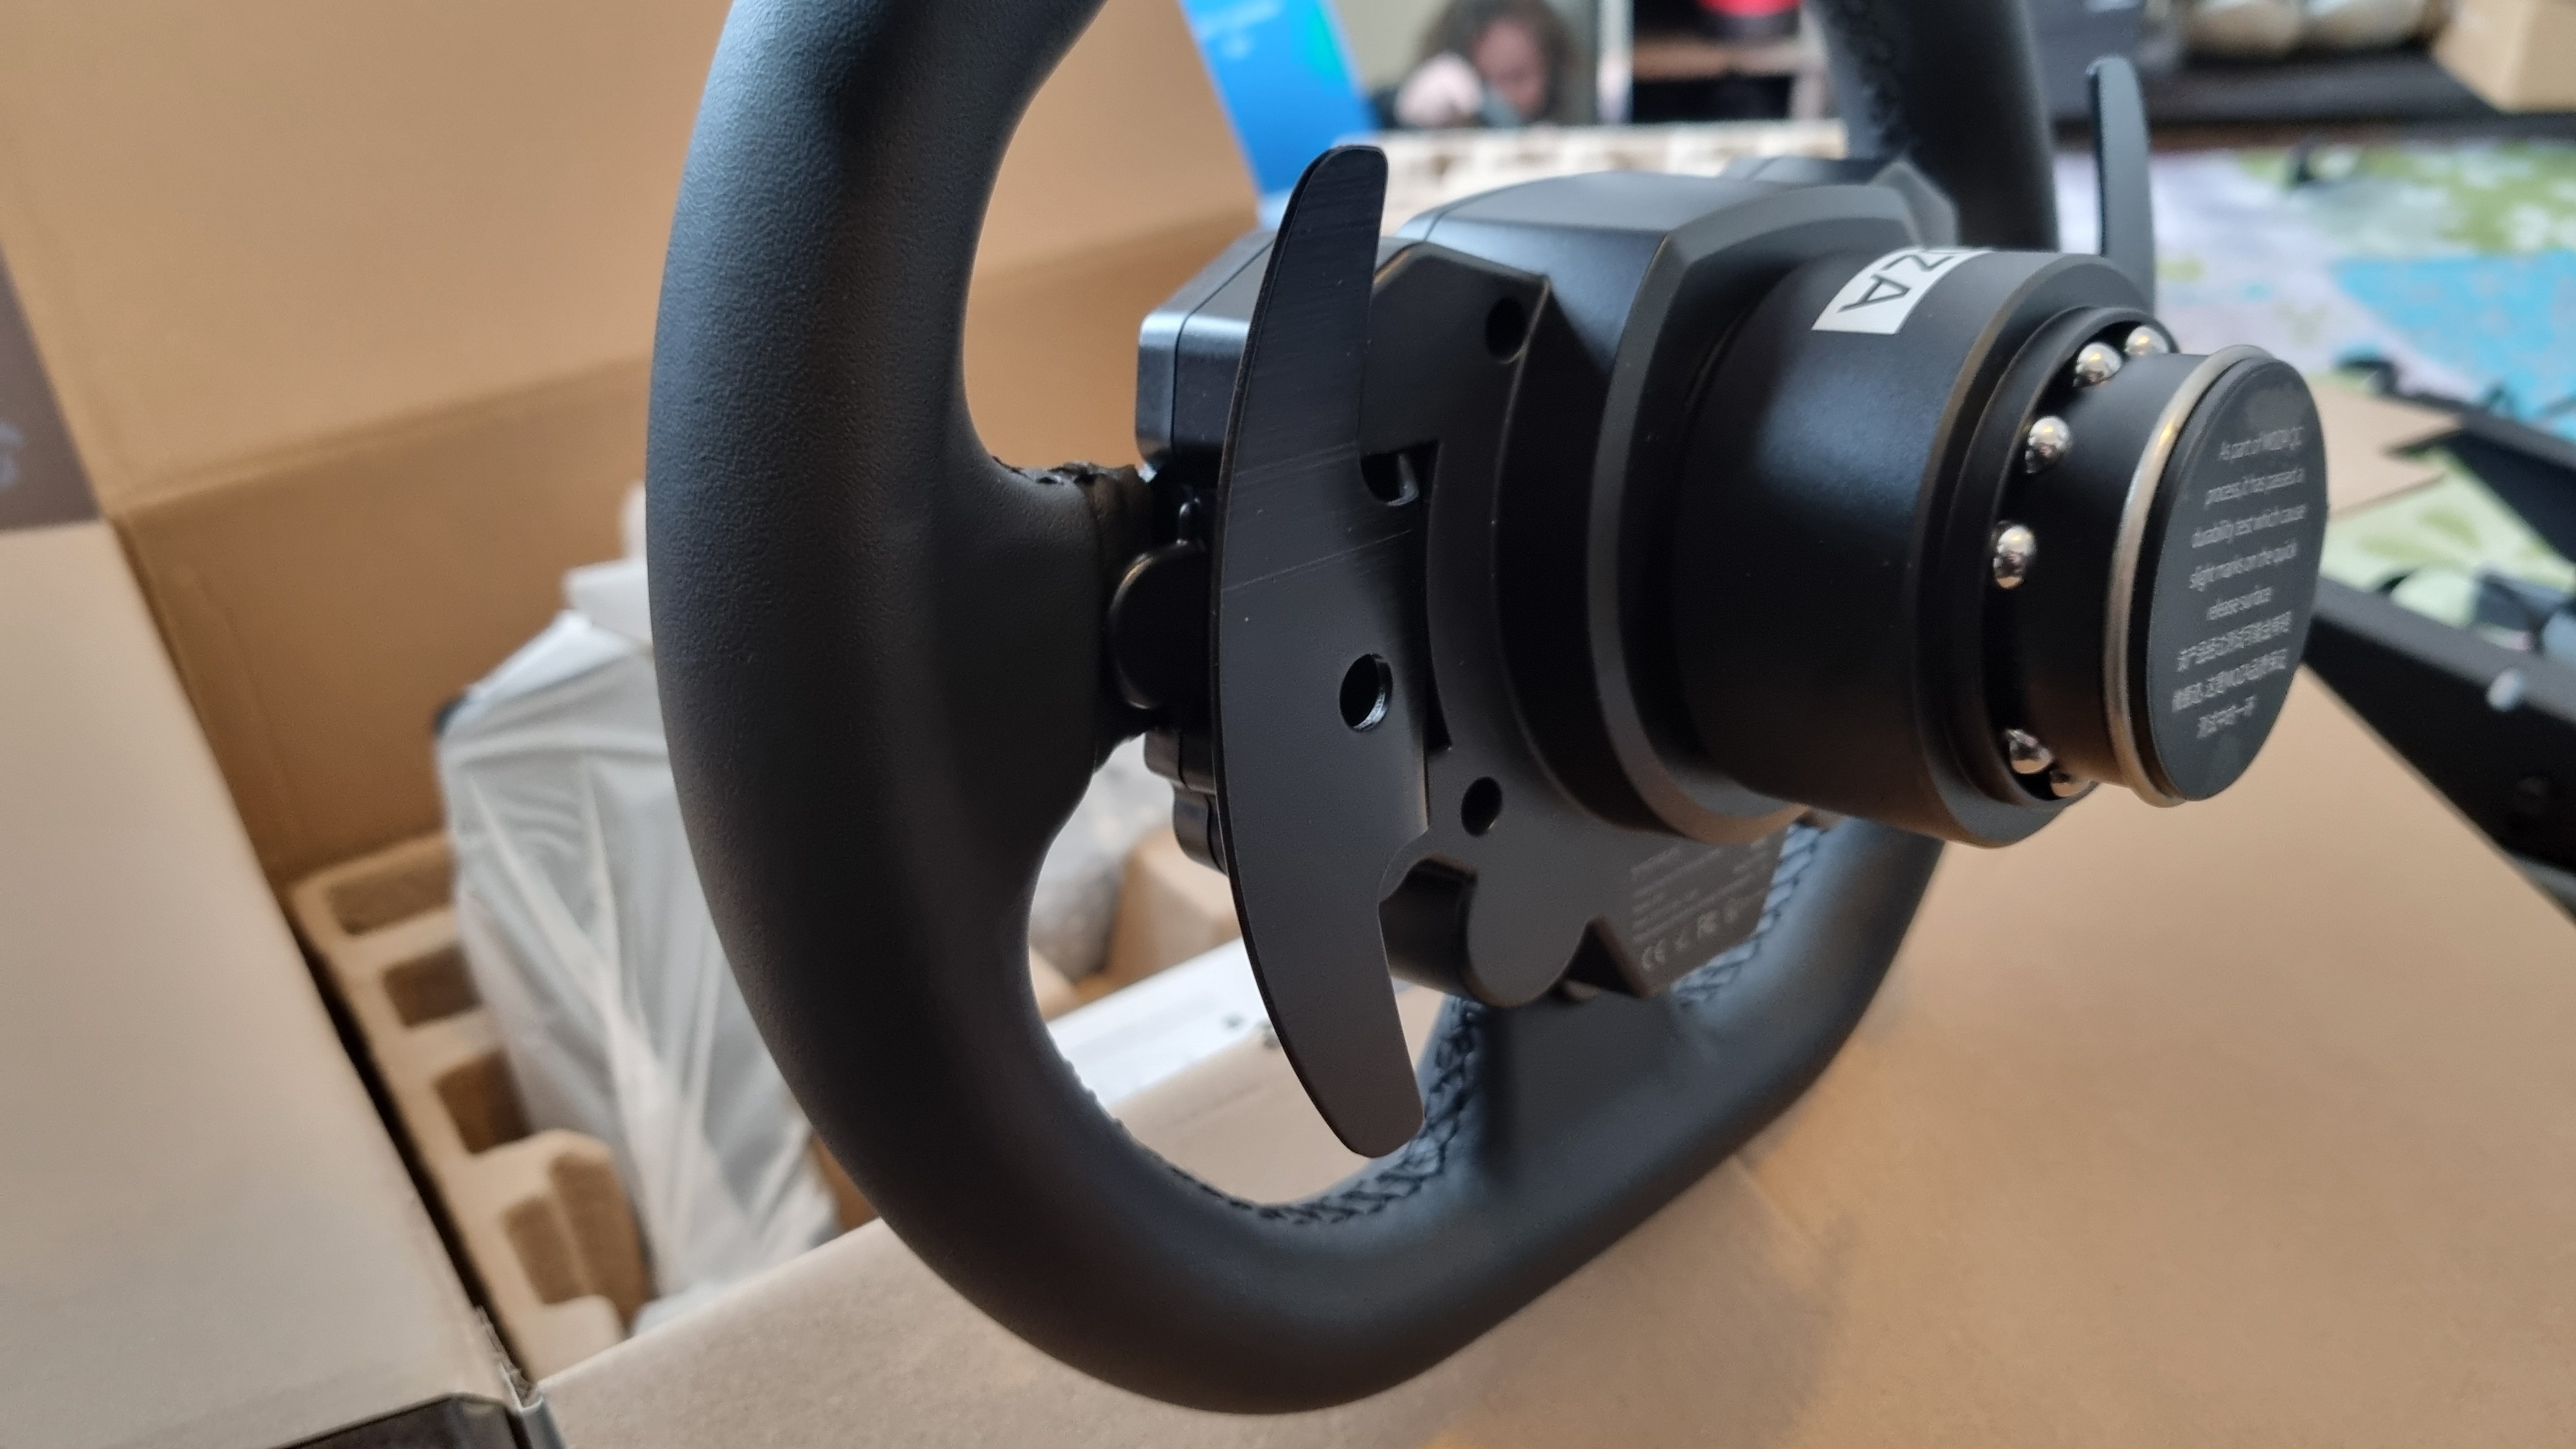 The rear of the MOZA R5 ES steering wheel, showing the magnetic shifter paddles